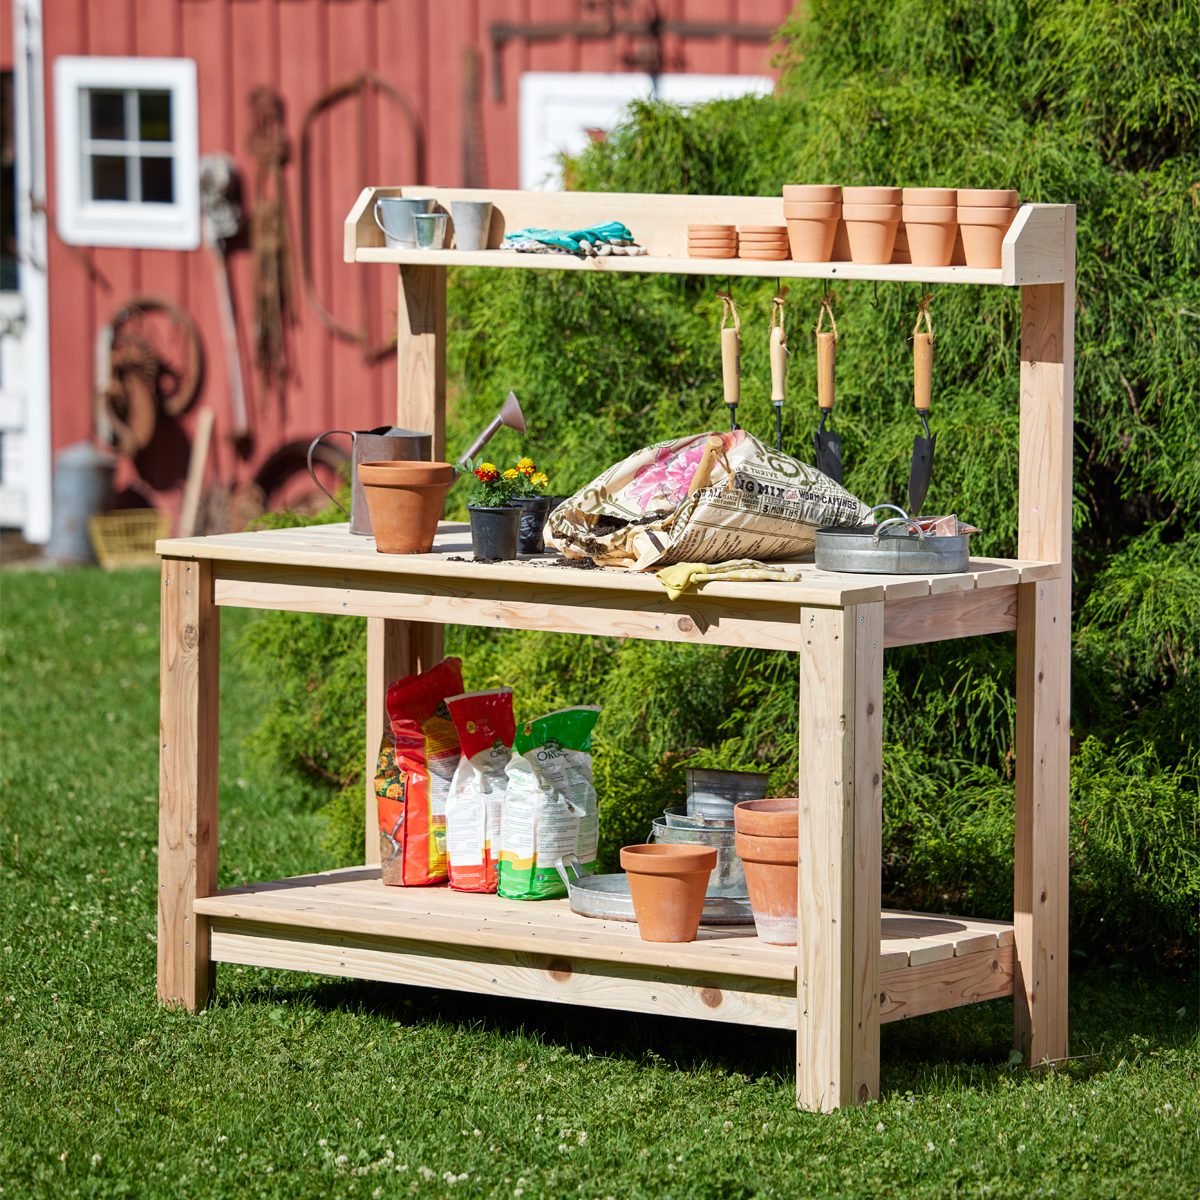 Fh22sep 620 56 035 How To Build A Simple Gardening Bench